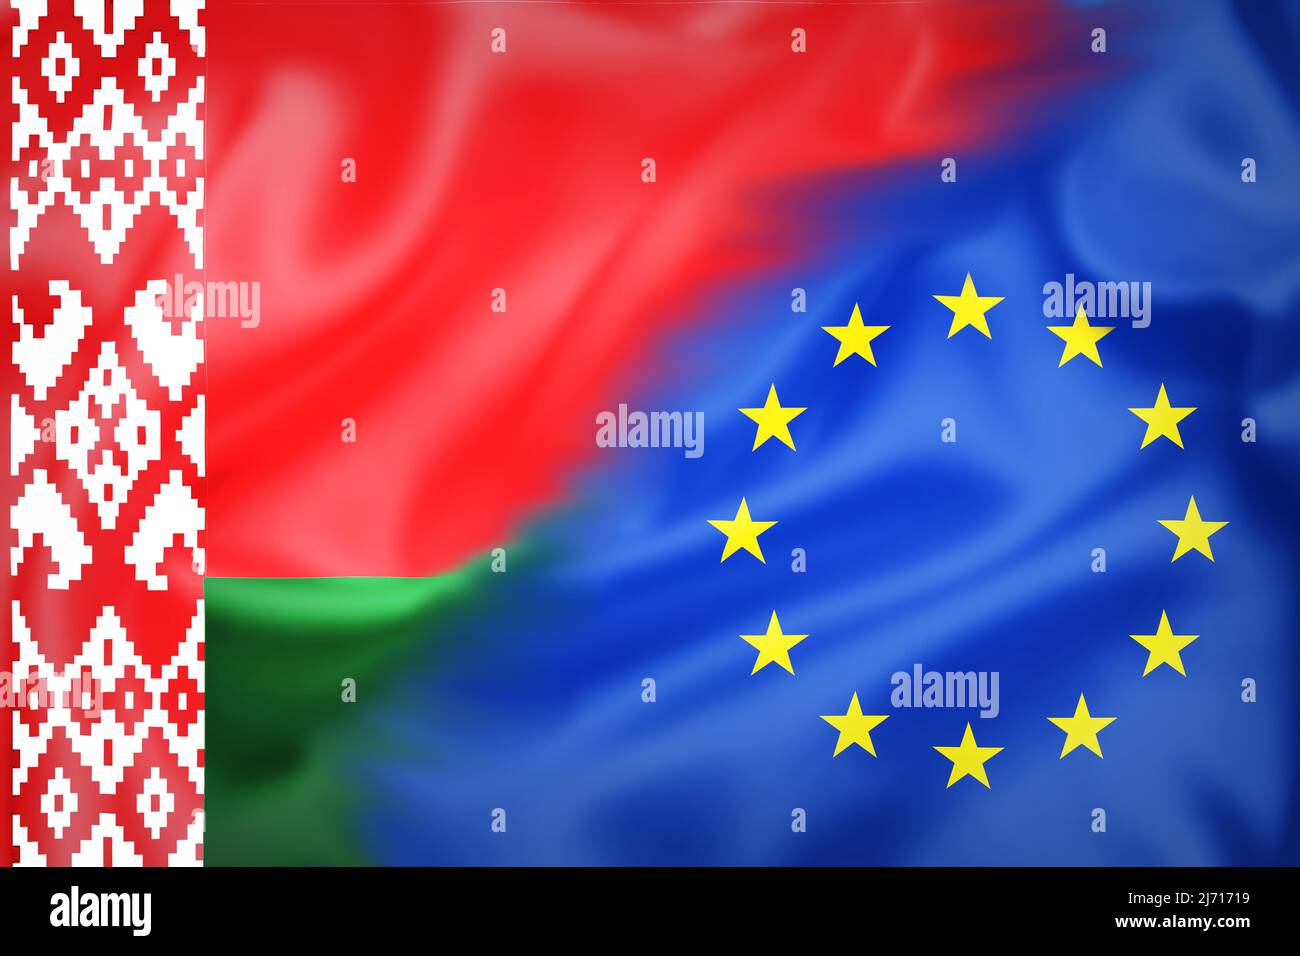 Flags of Belarus and EU illustration, concept of tense relations in migrant border crisis Stock Photo